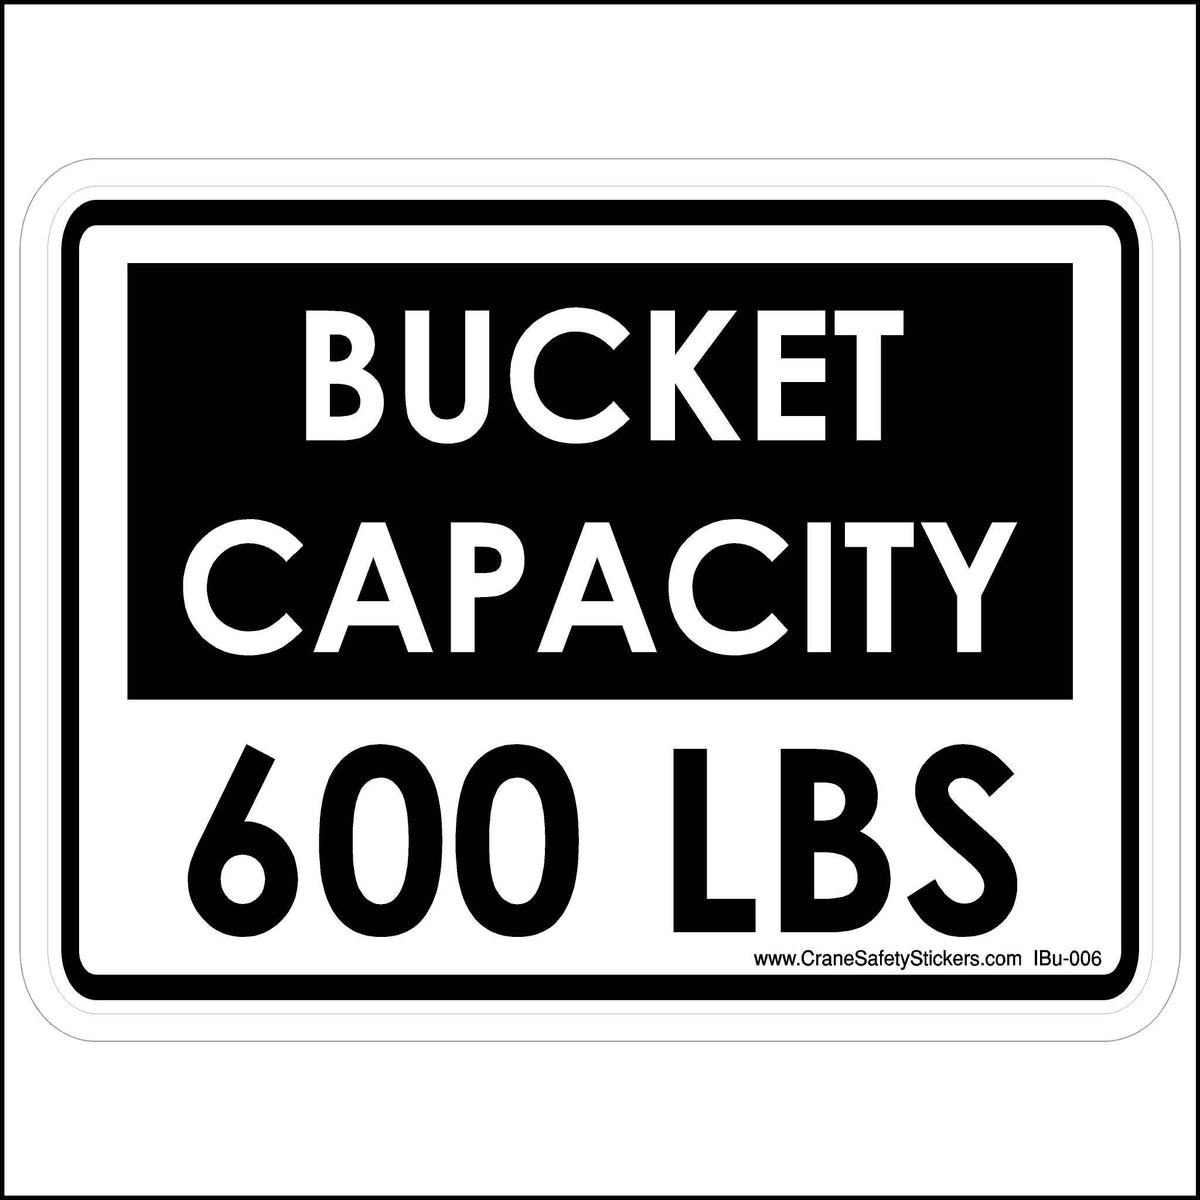 This Bucket Capacity 600 Lbs Sticker For Bucket Trucks Is Printed With. Bucket Capacity 600 LBS.